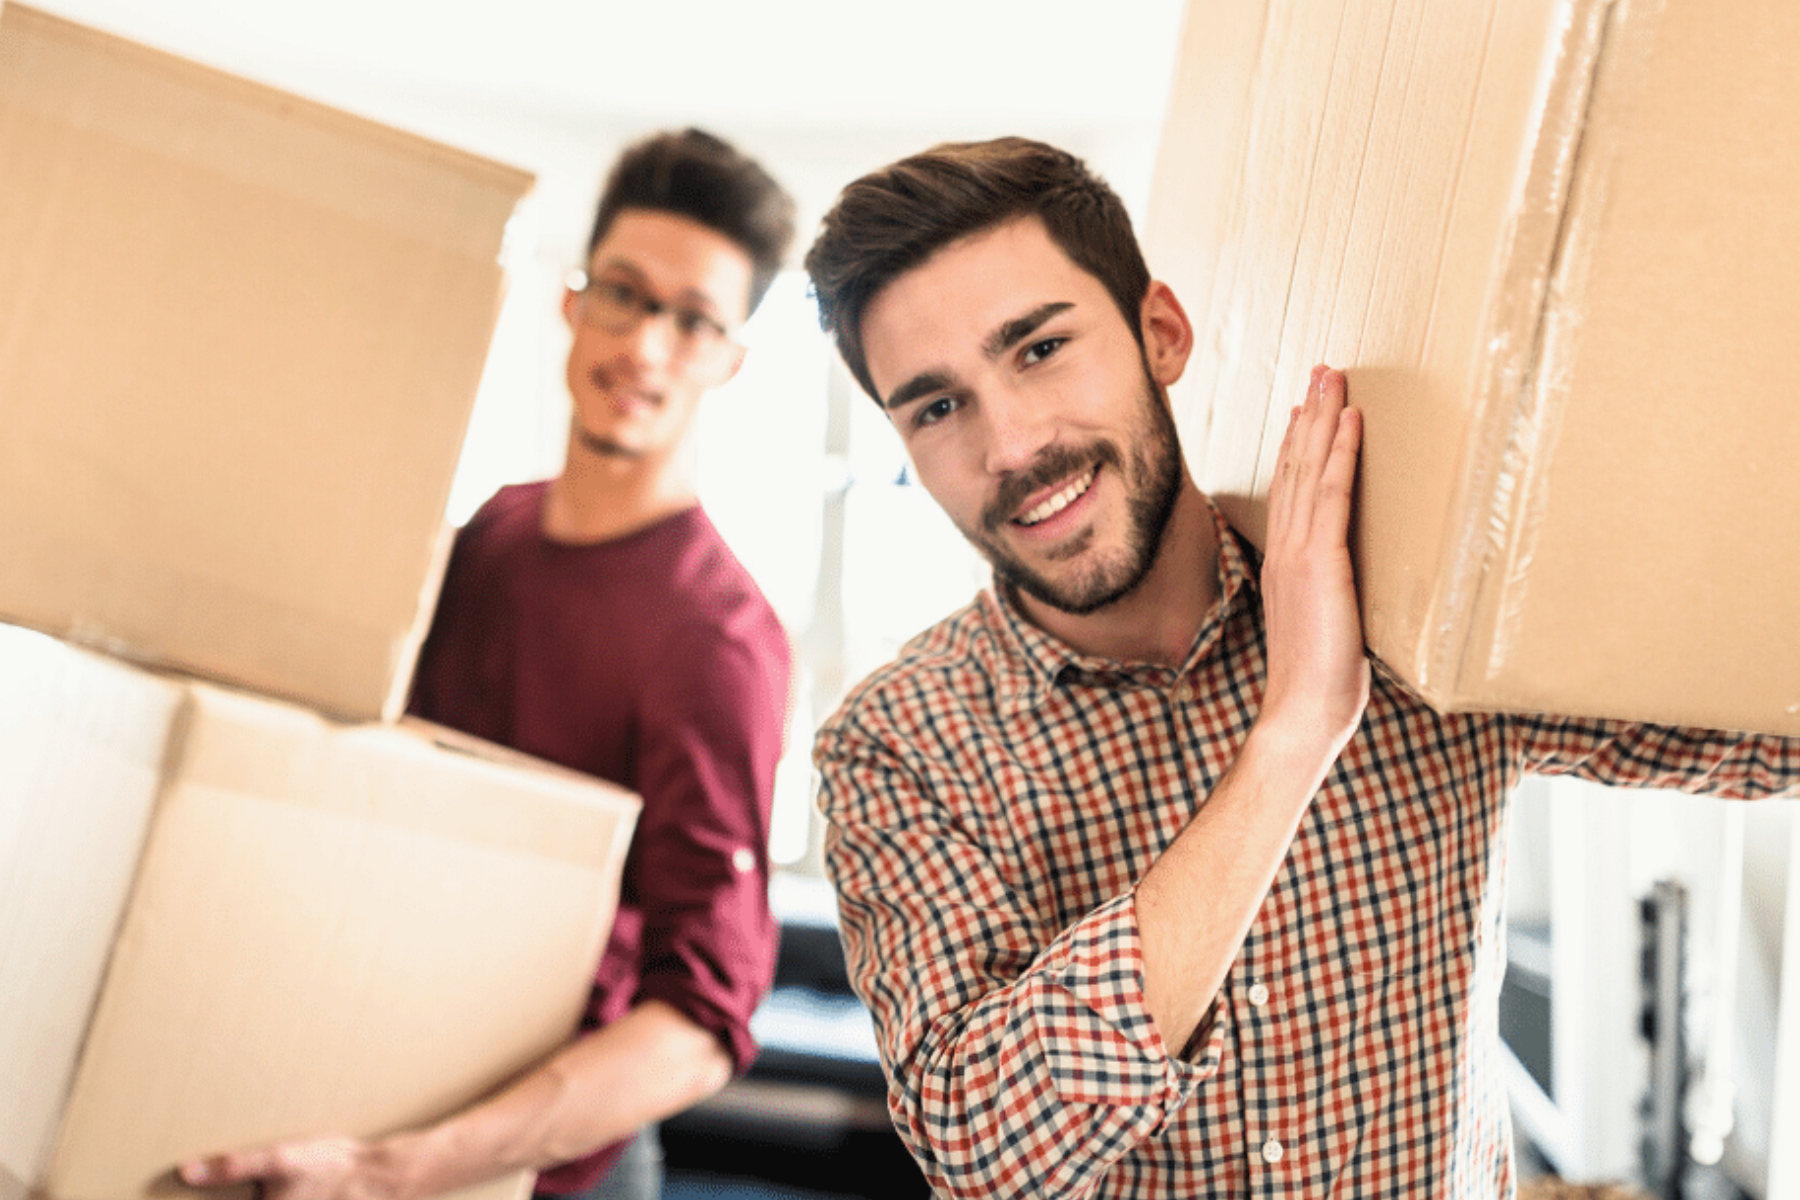 Renters Insurance For Roommates - Do They Need It?